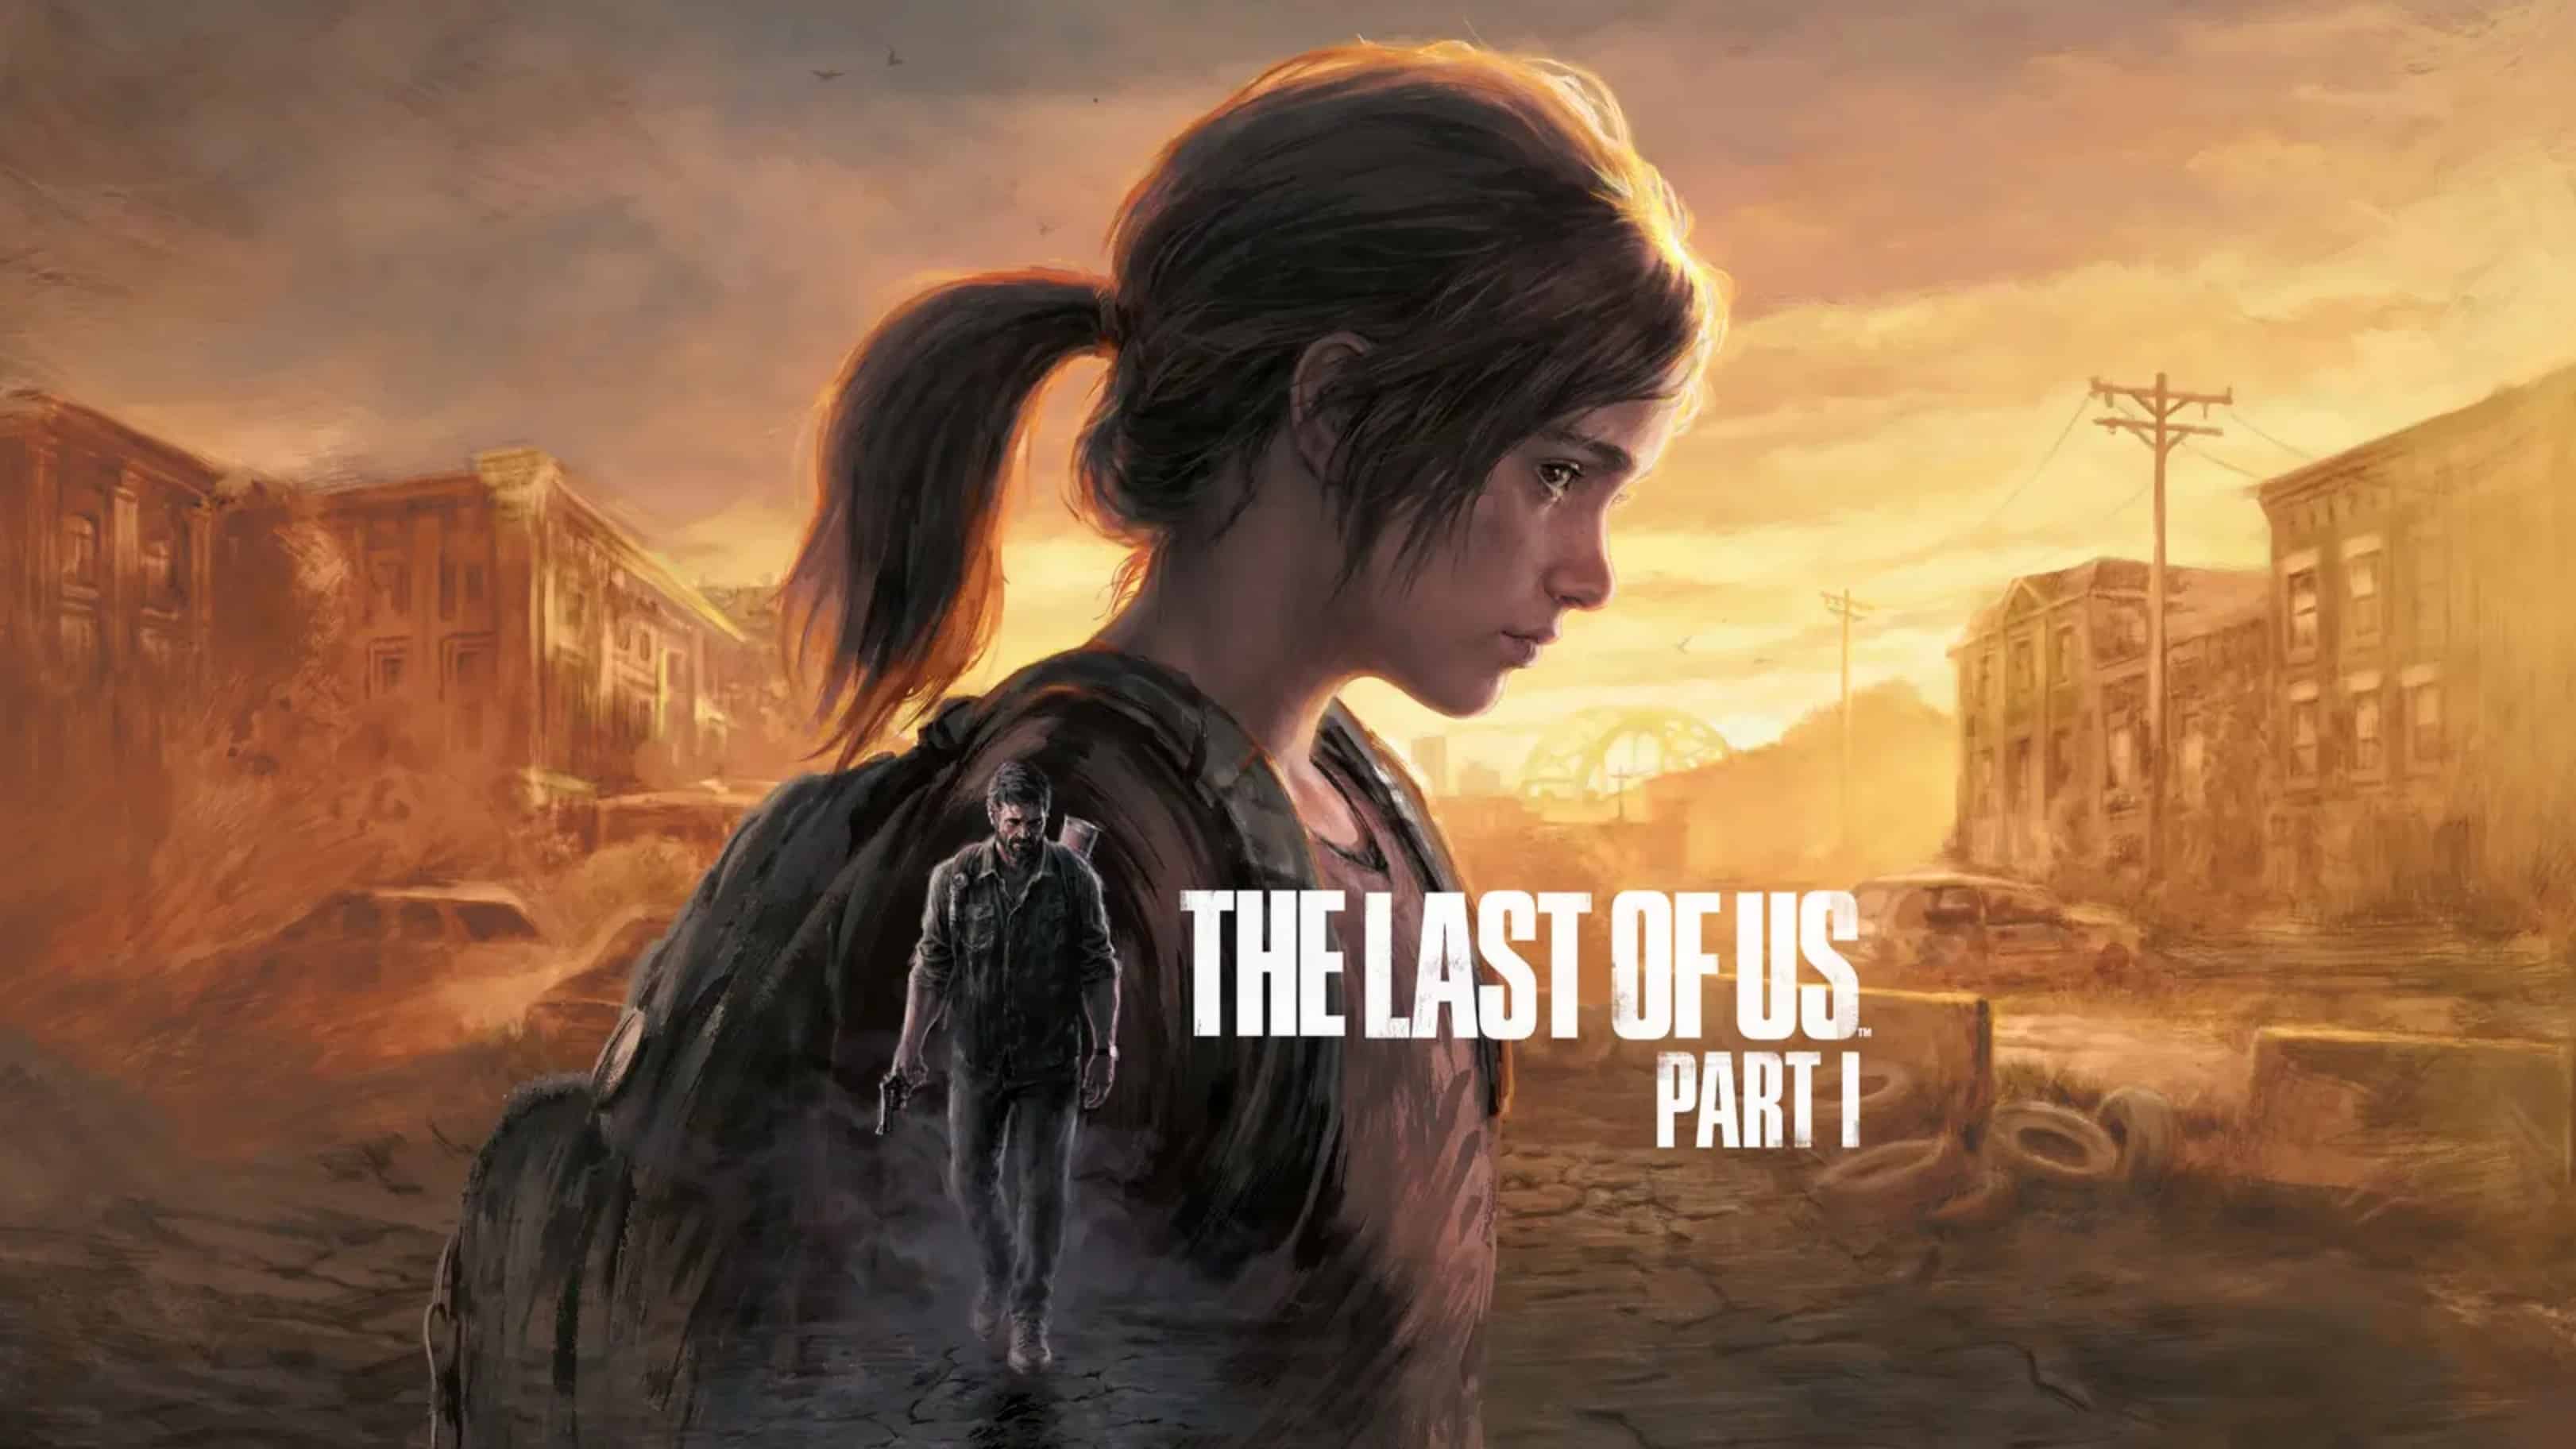 The Last of Us Part 1 cover art